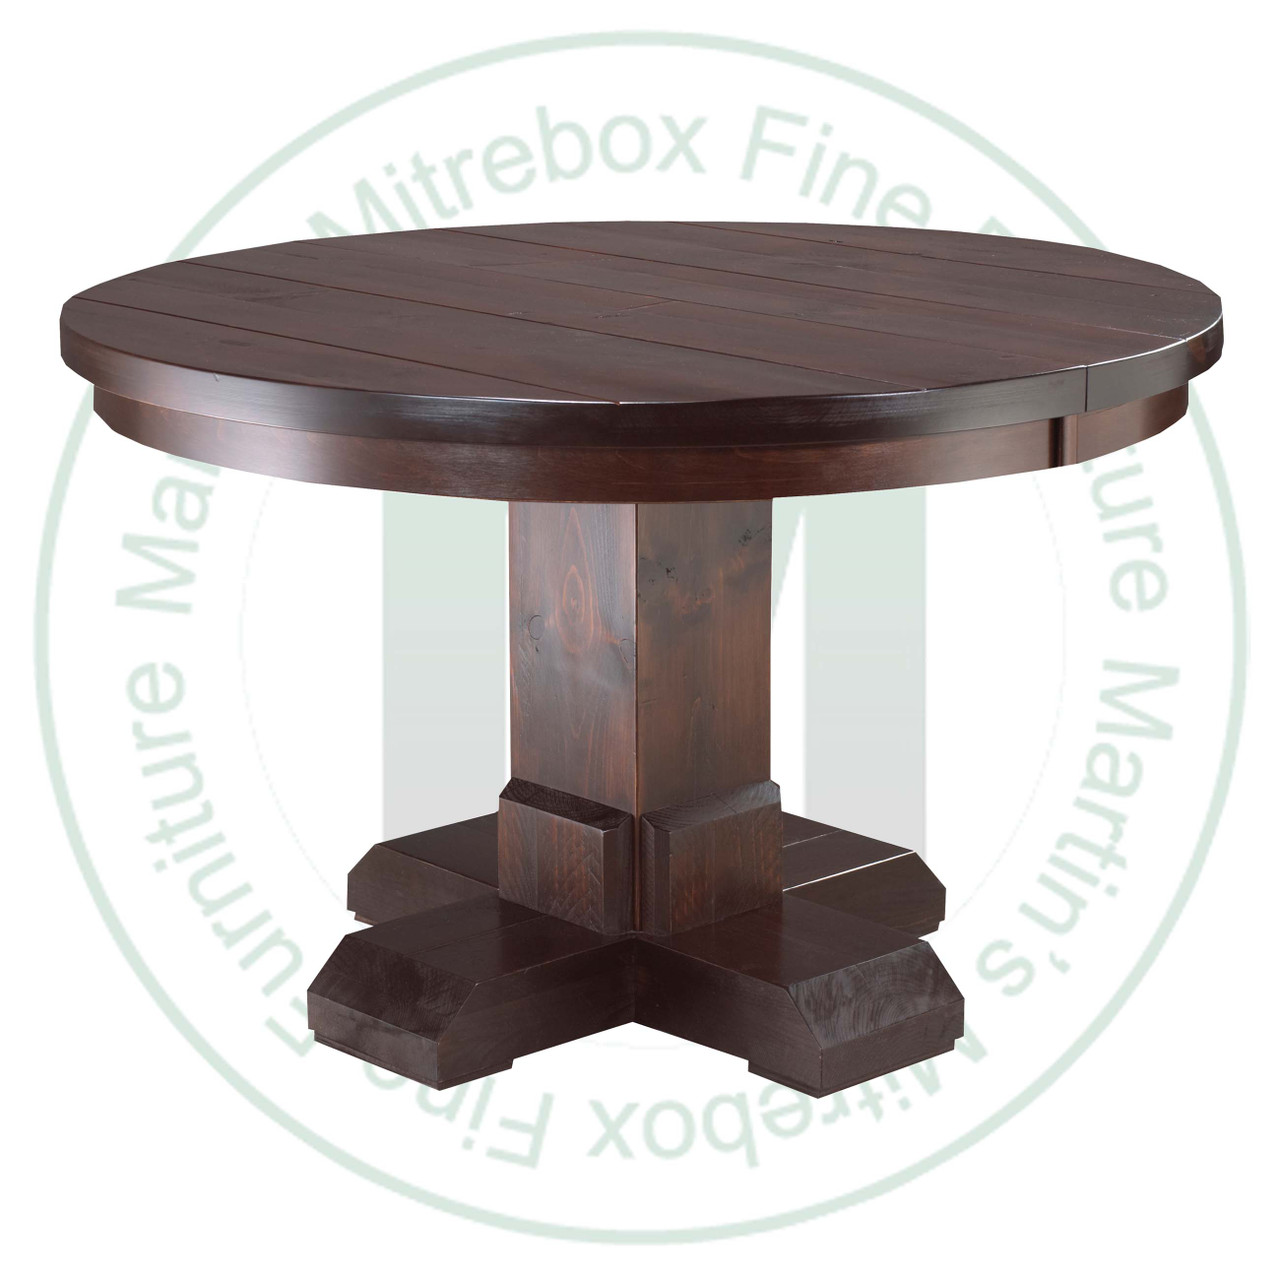 Oak Shrewsbury Single Pedestal Table 36''D x 42''W x 30''H Round Solid Table. Table Has 1.25'' Thick Top.